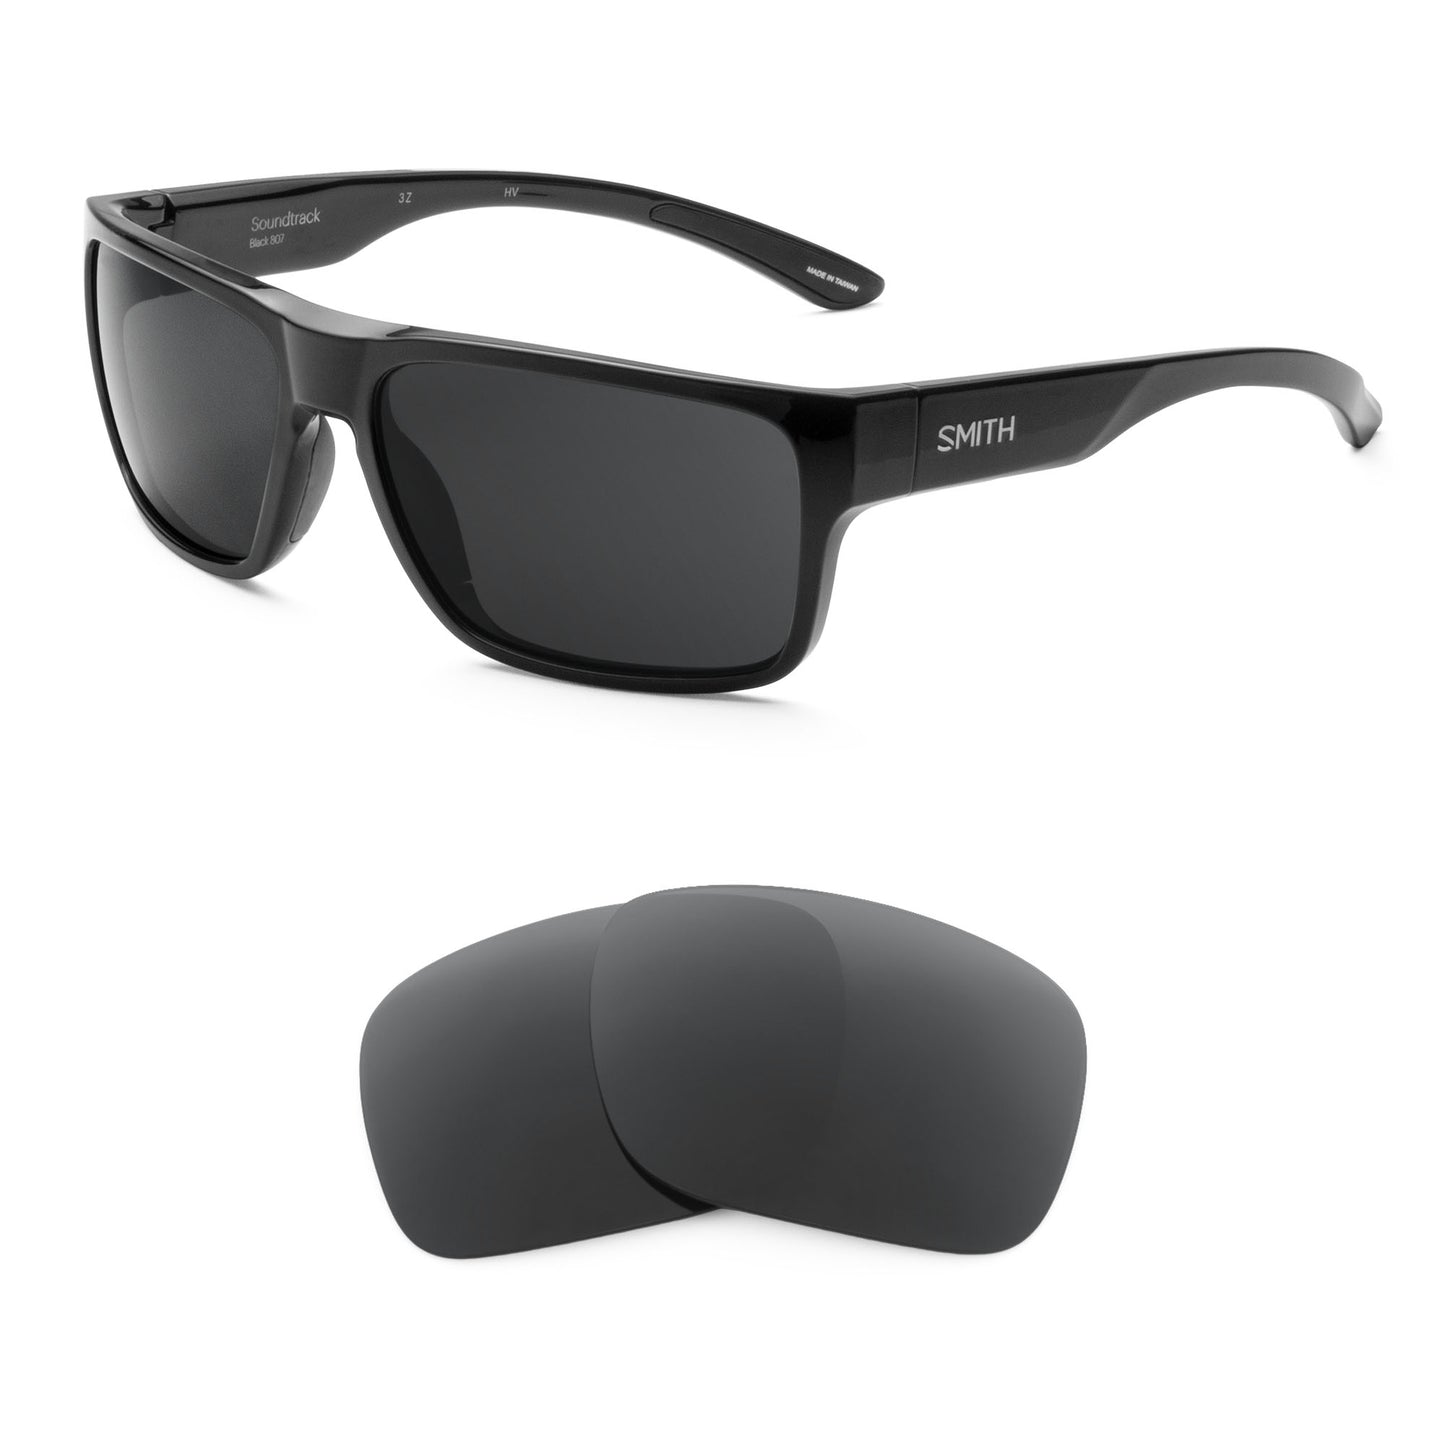 Smith Soundtrack sunglasses with replacement lenses